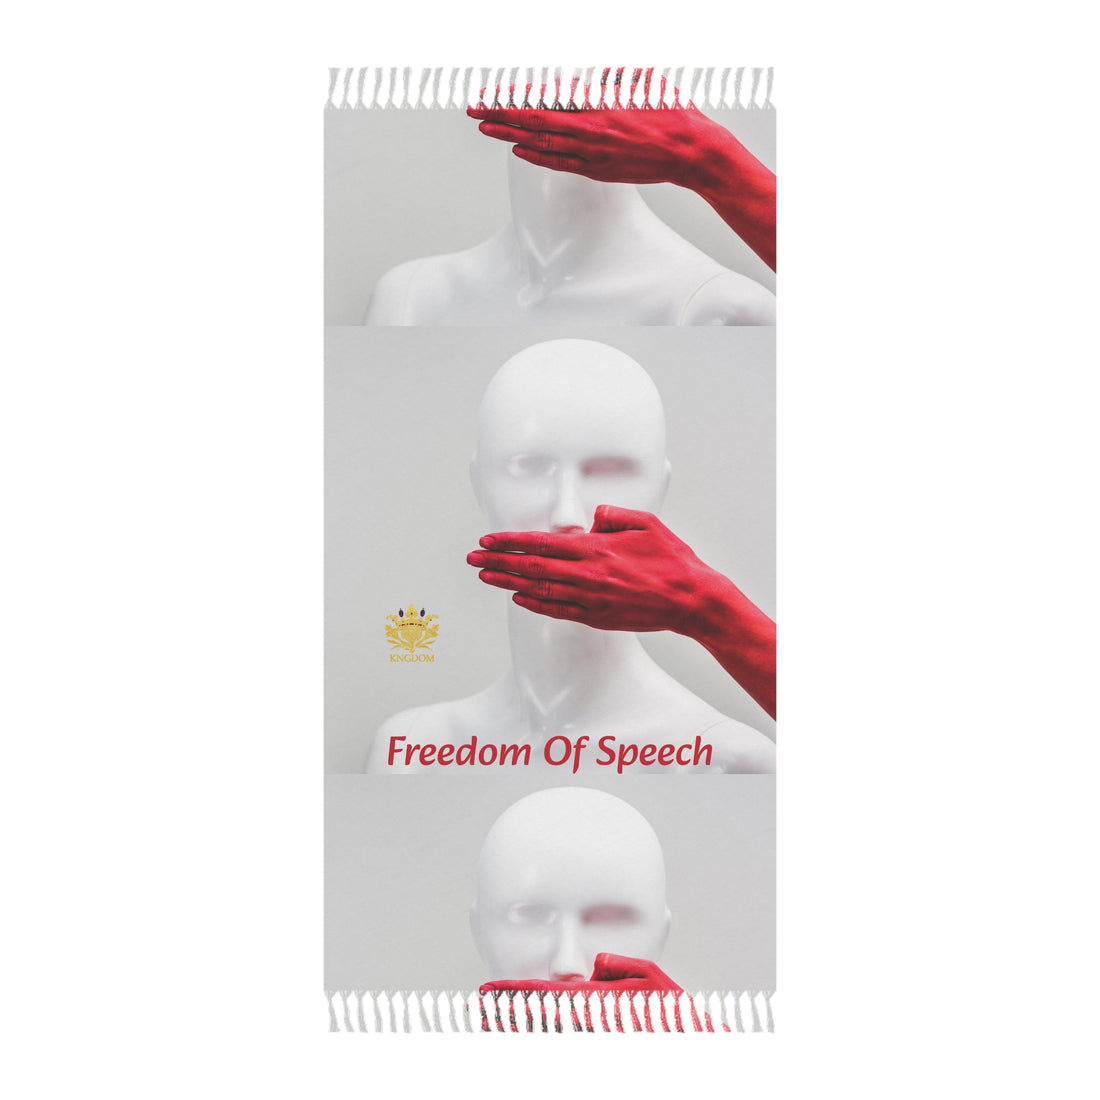 WE ARE AMERICA &quot;Freedom Of Speech&quot;- (THE BLOOD OF THE MARTYRS- Red Hand Covering Mouth) Boho Beach Cloth W/ Kngdom Logo